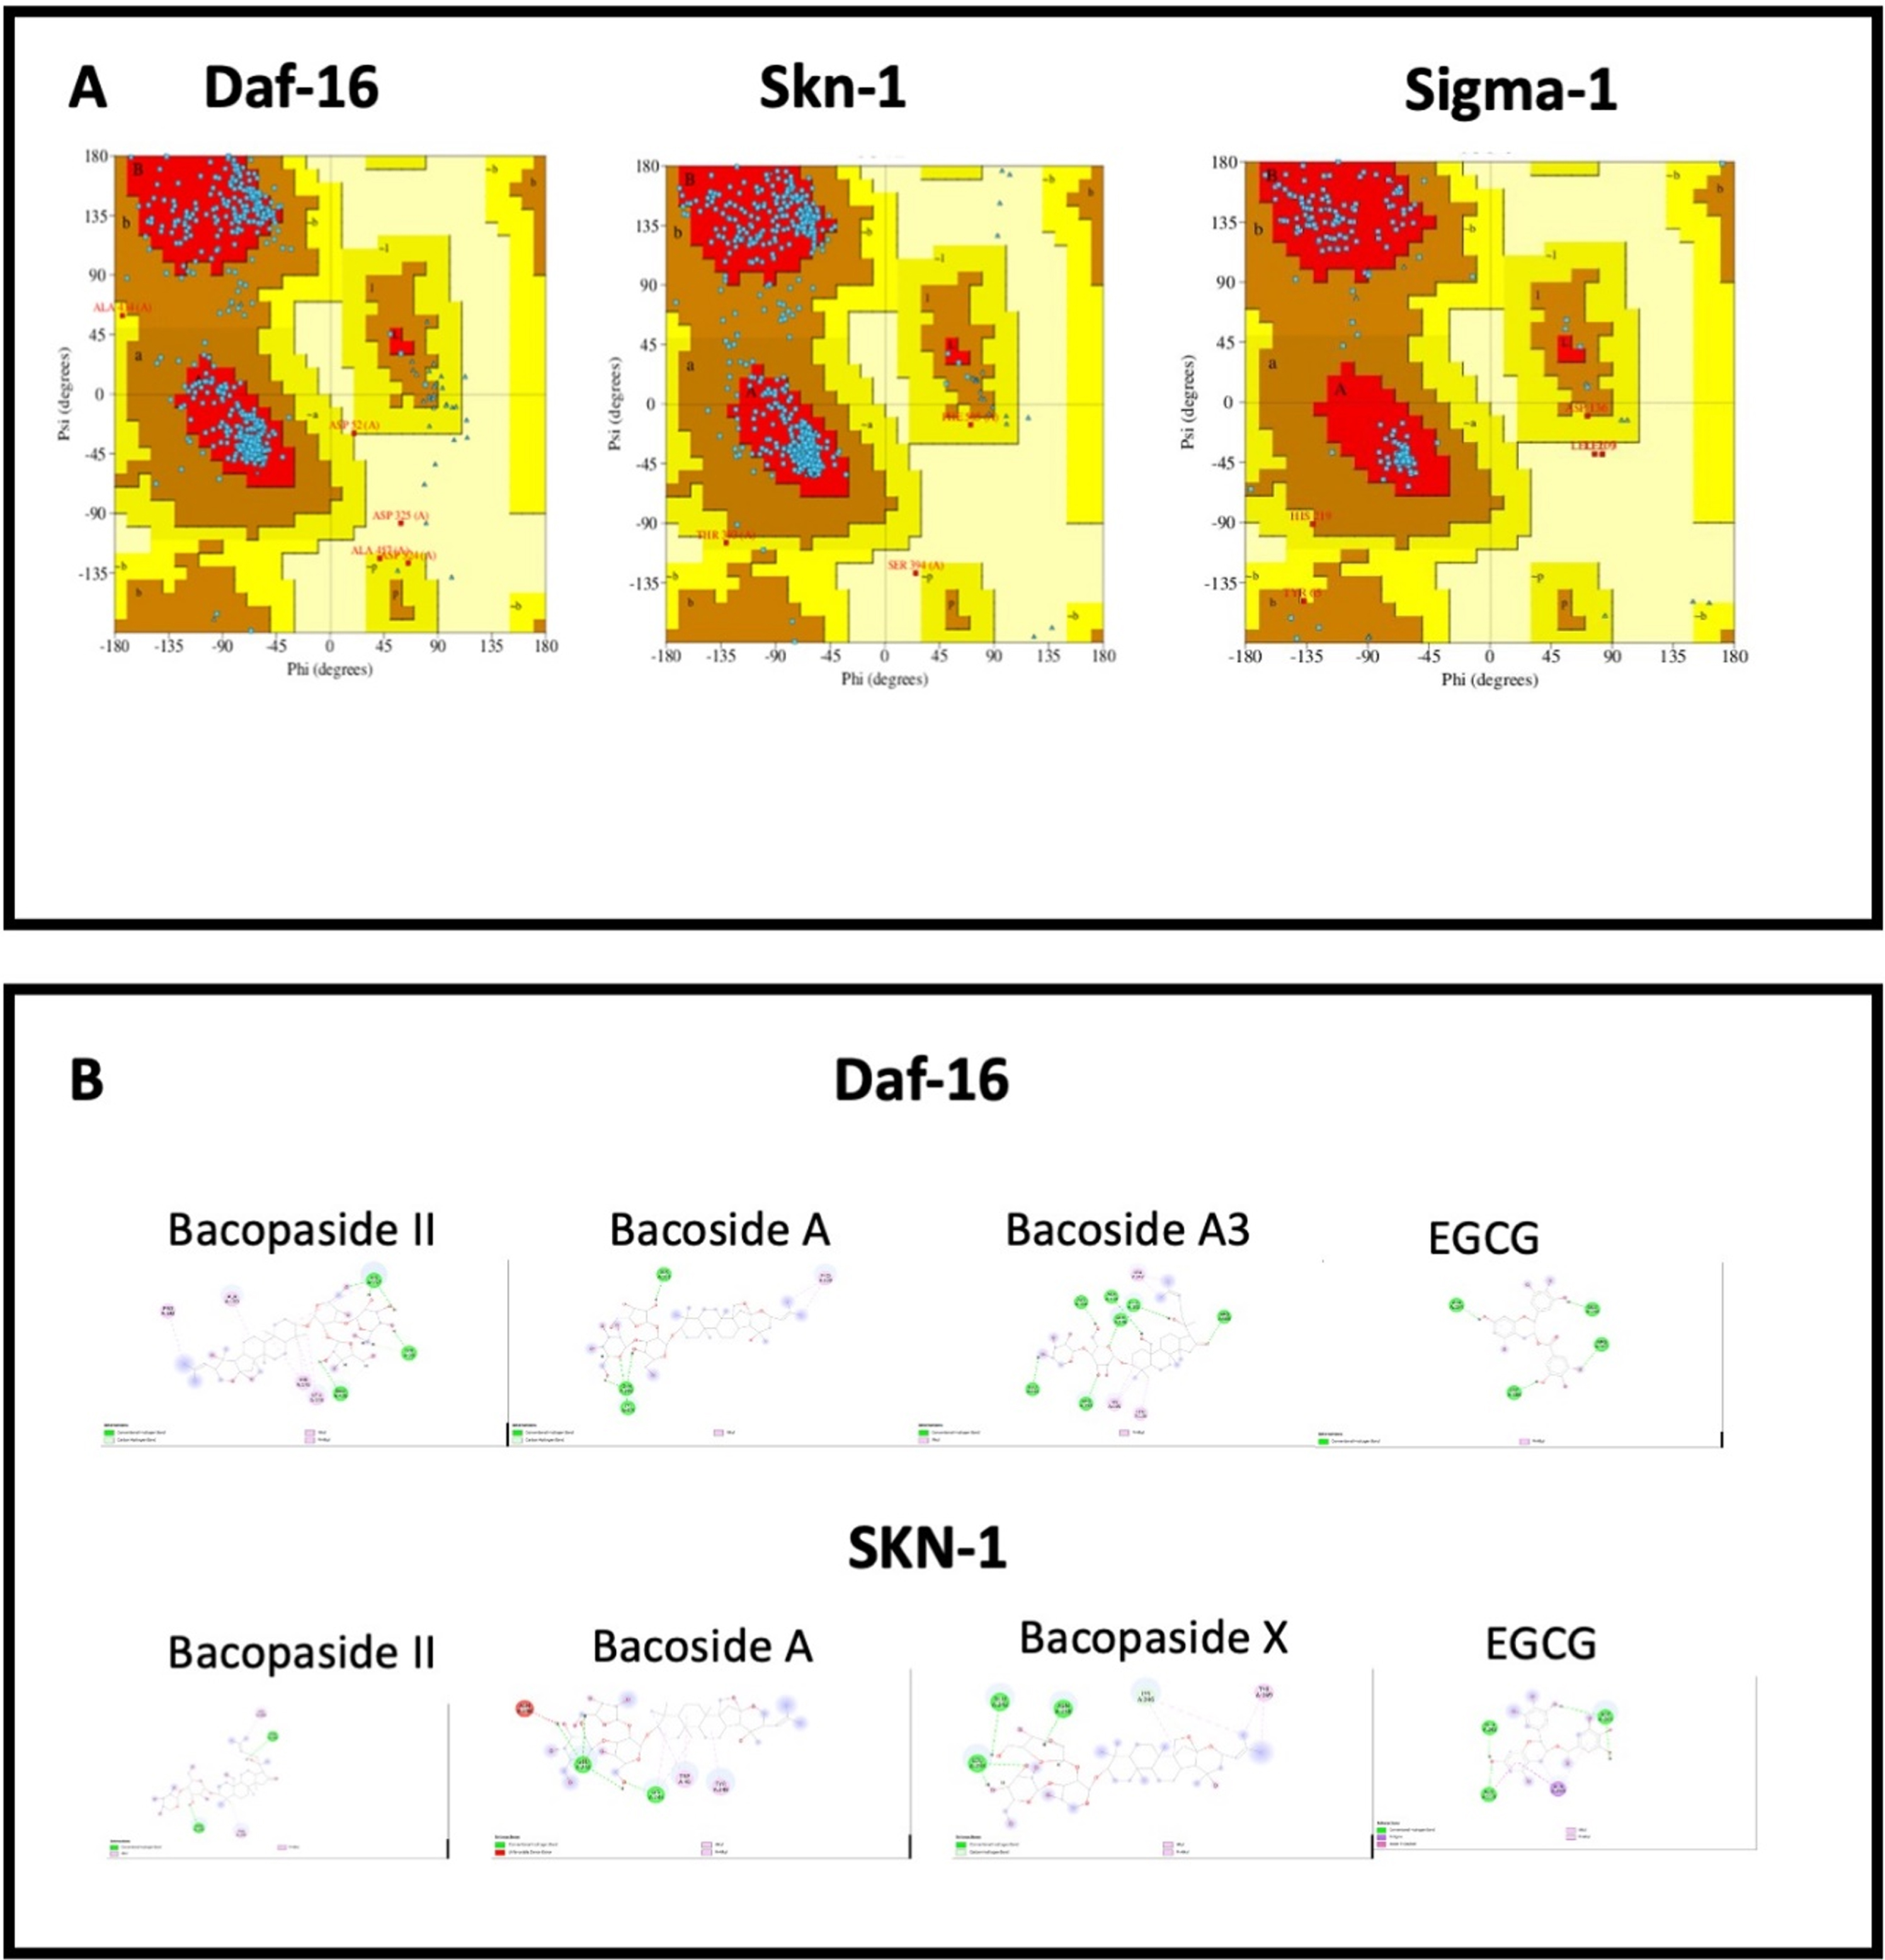 A. Ramachandran plots showing SKN-1, DAF-16, and human sigma non-opioid intracellular receptor 1; B. Interactions of Bacopaside II, Bacoside A, Bacoside A3 and EGCG with amino acids in Daf-16 and SKN-1.